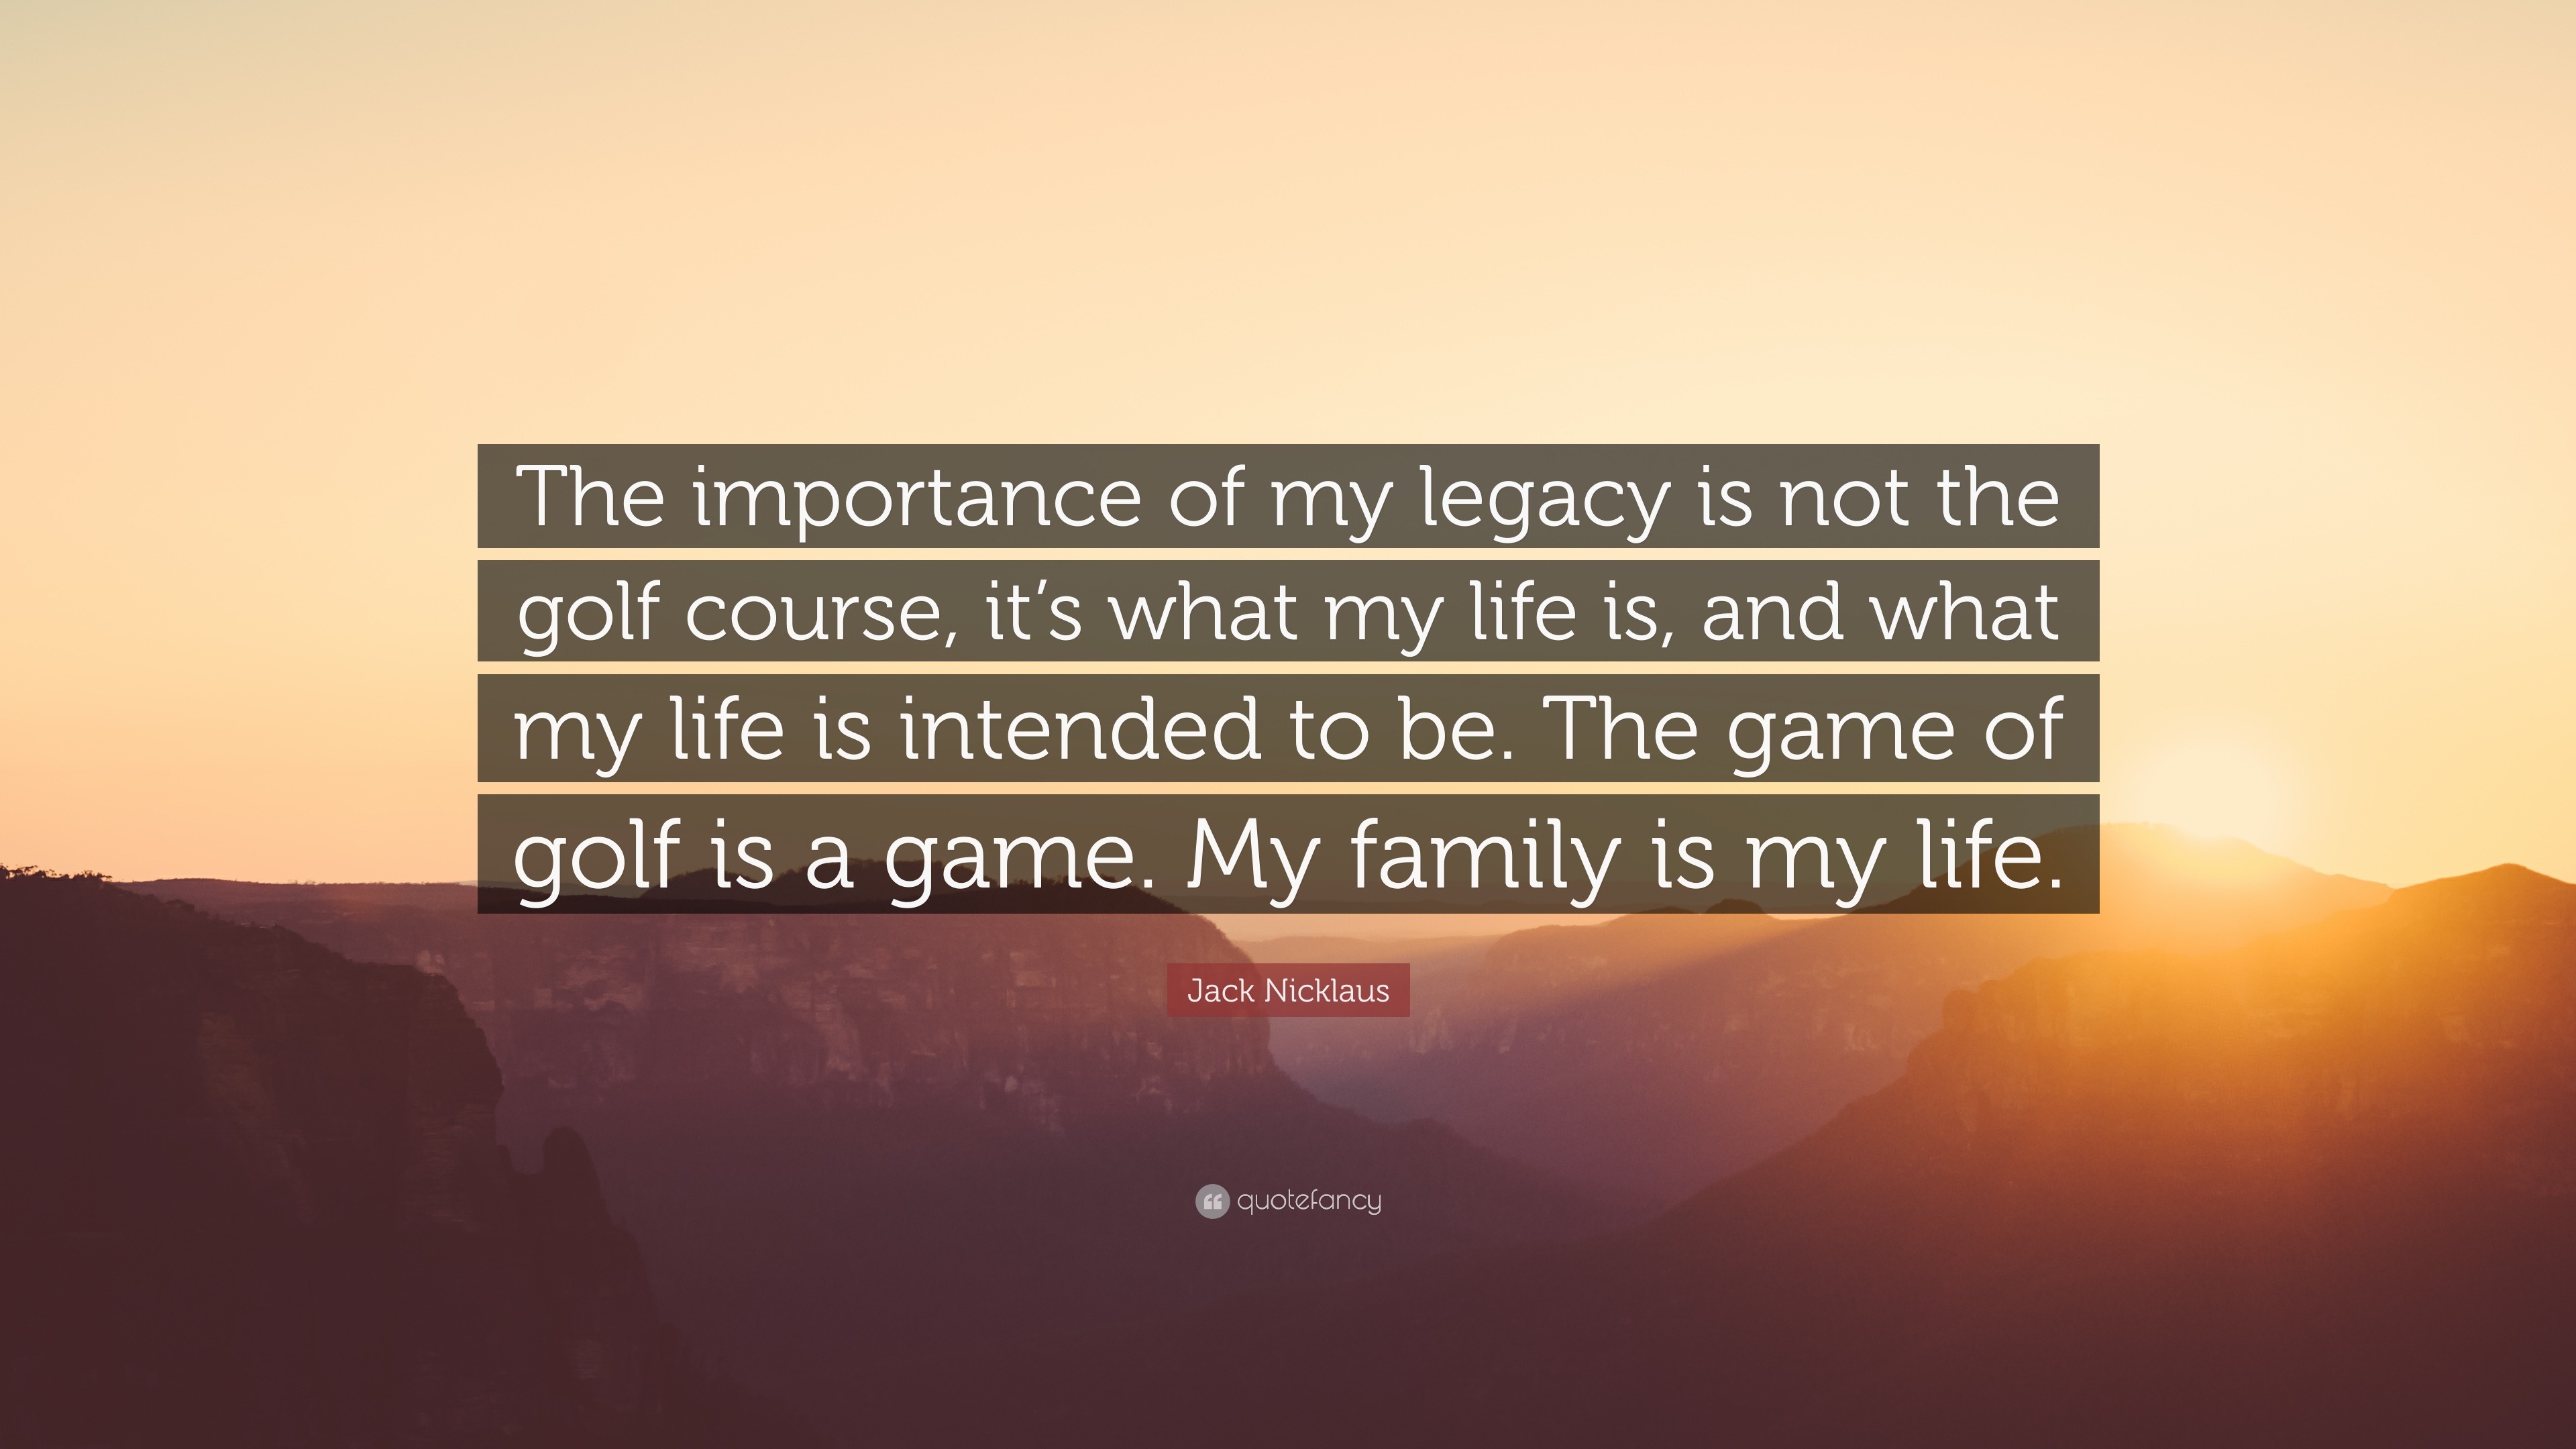 Jack Nicklaus Quote The Importance Of My Legacy Is Not The Golf Course It S What My Life Is And What My Life Is Intended To Be The Game O 7 Wallpapers Quotefancy